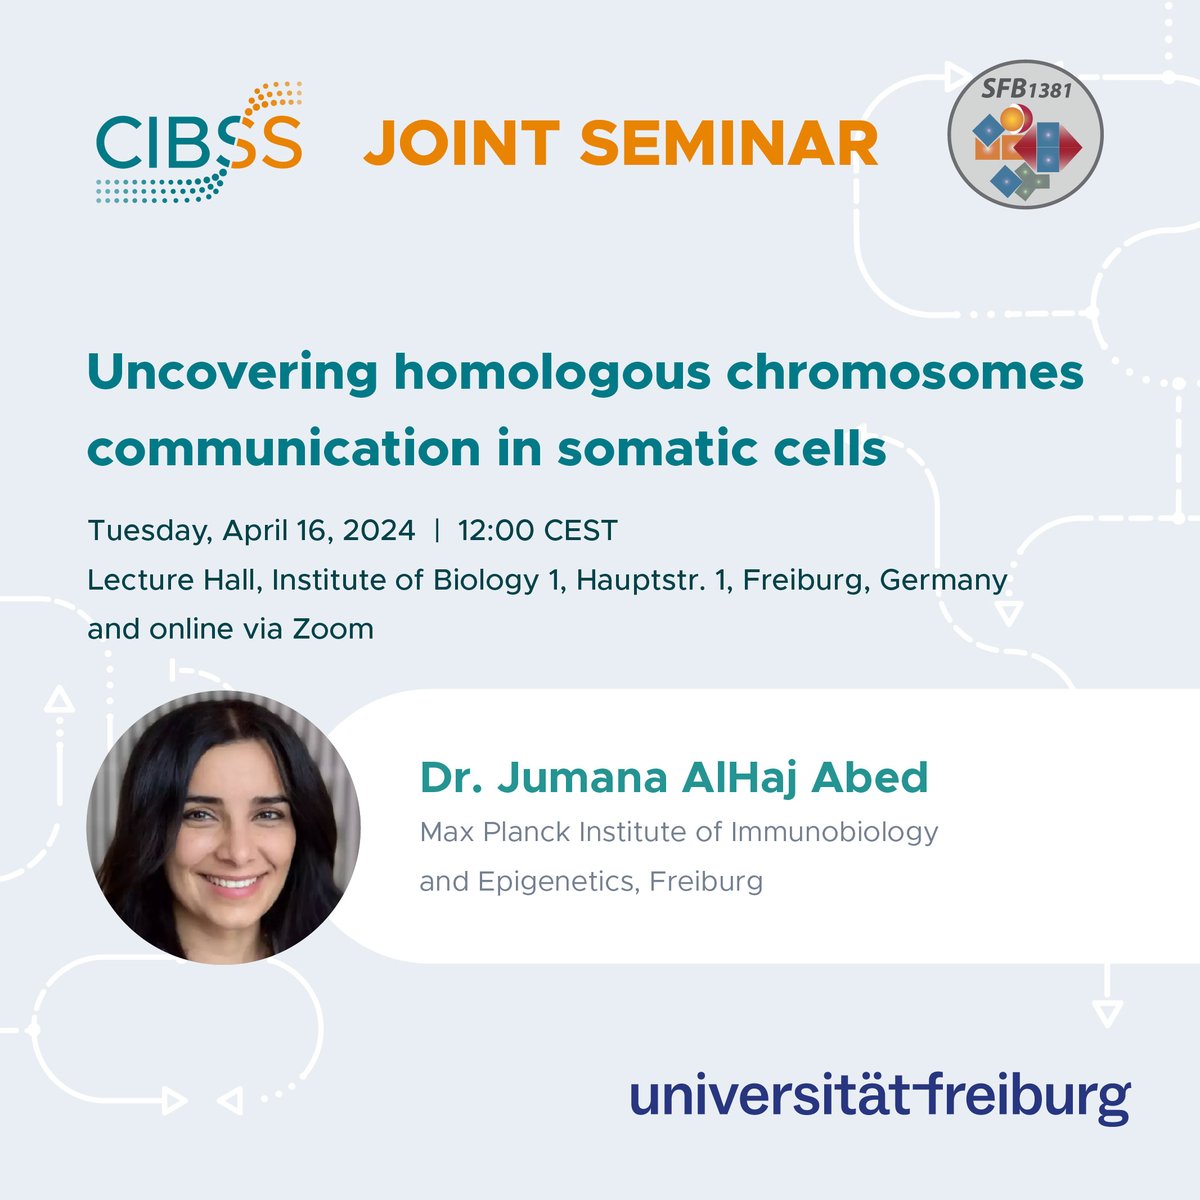 In tomorrow's CIBSS and @sfb1381 Joint Seminar, Jumana AlHaj Abed (@JumanaAHA) from @mpi_ie will give insights into her research on chromosome organization and #GeneRegulation. 🧬 Join us in Freiburg or online: ➡️cibss.uni-freiburg.de/news-and-event…